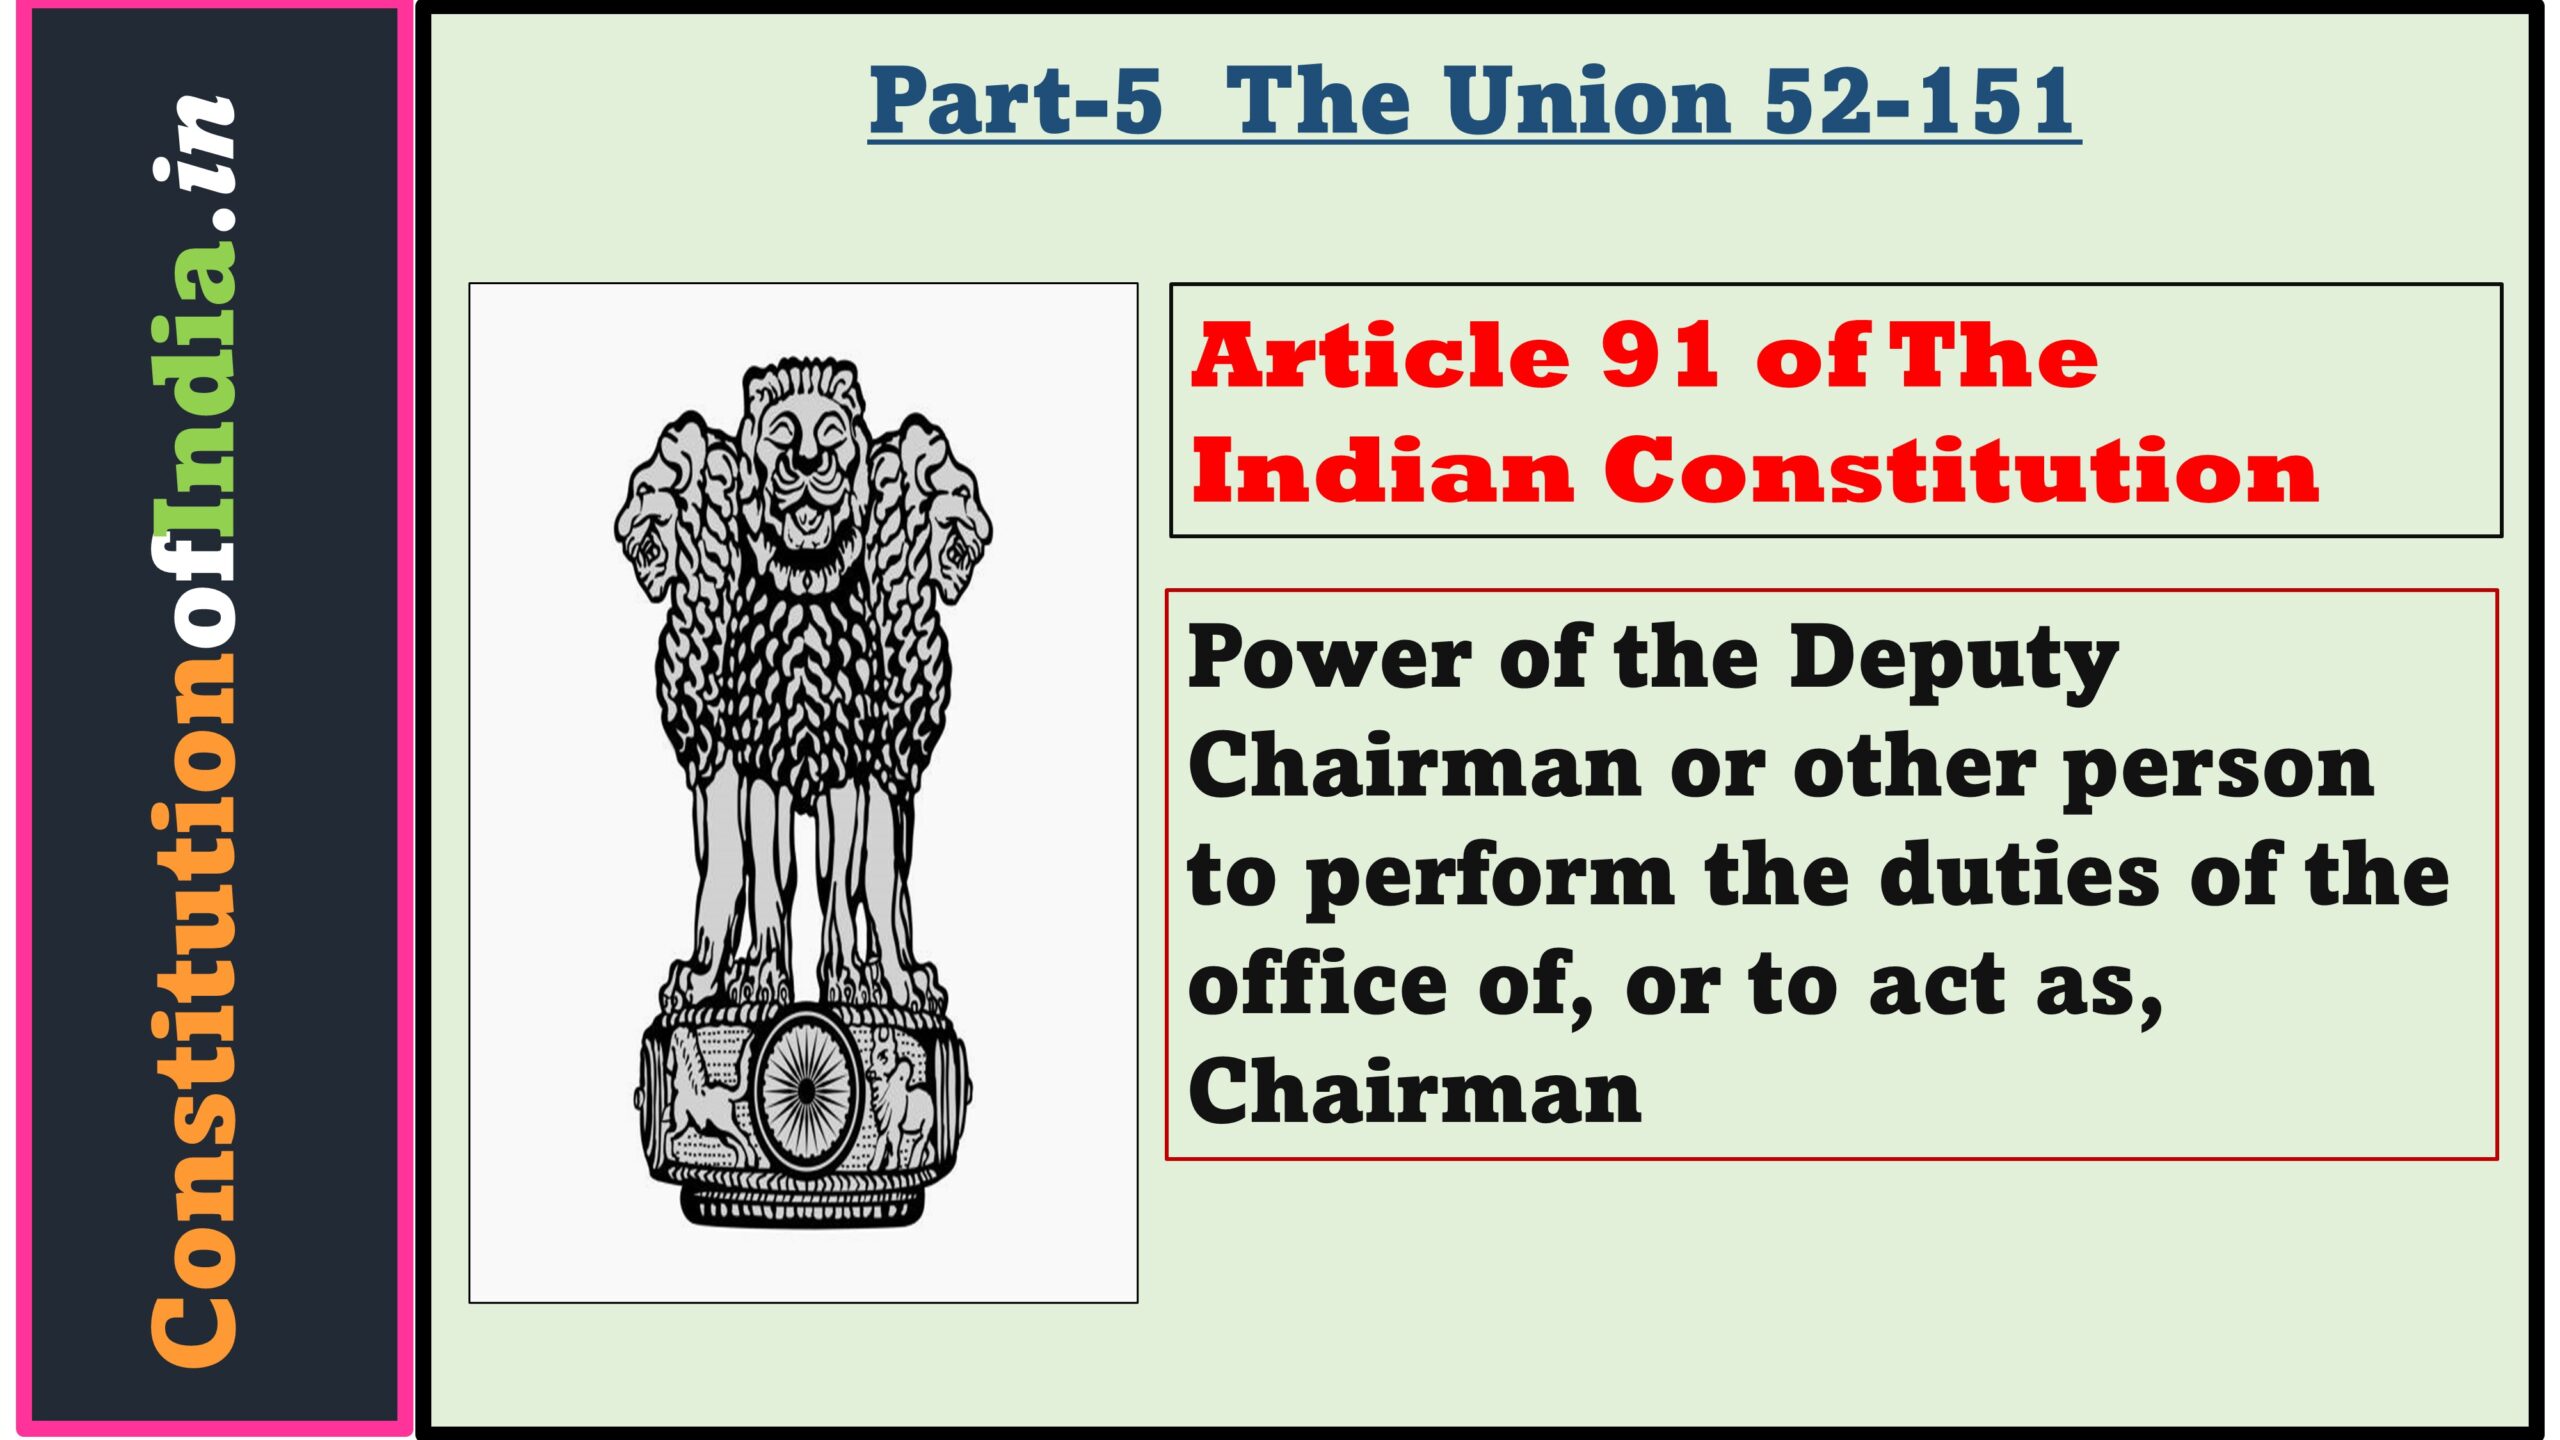 Article 91 of The Indian Constitution